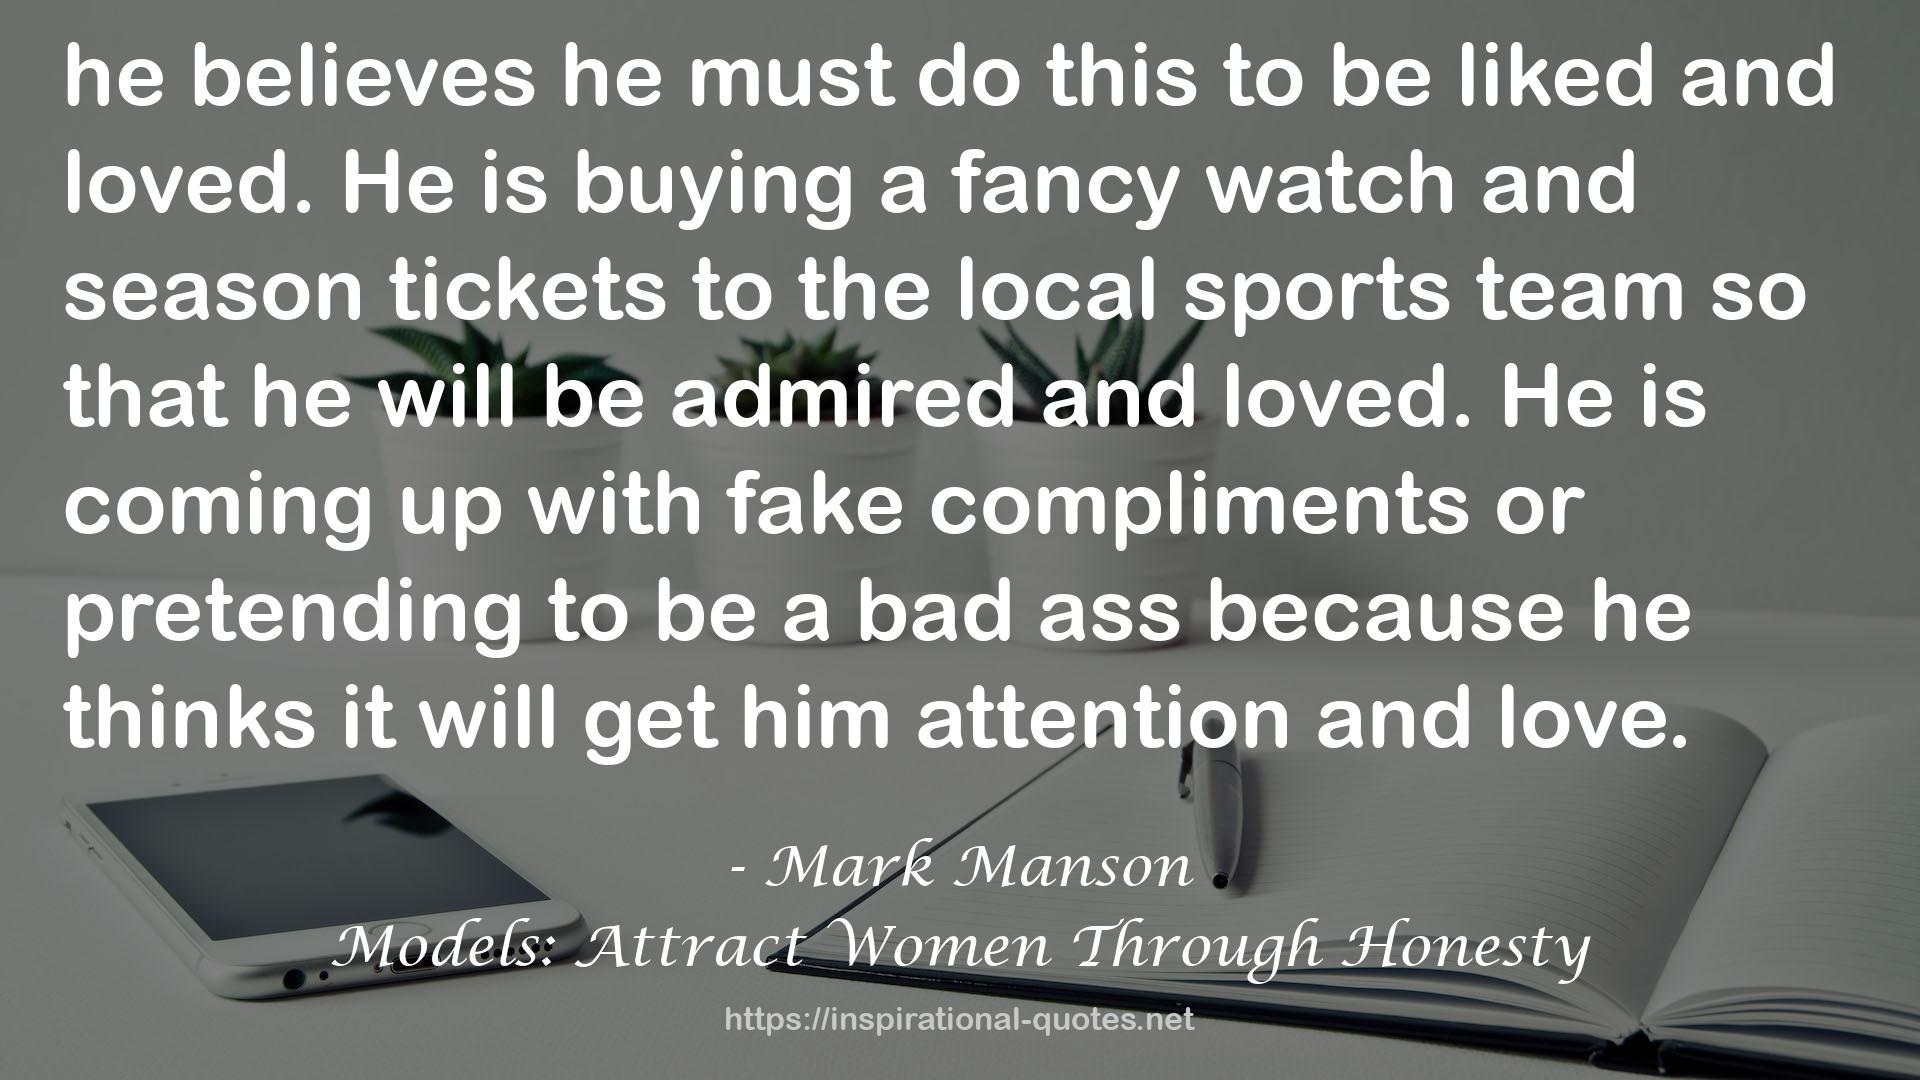 Models: Attract Women Through Honesty QUOTES